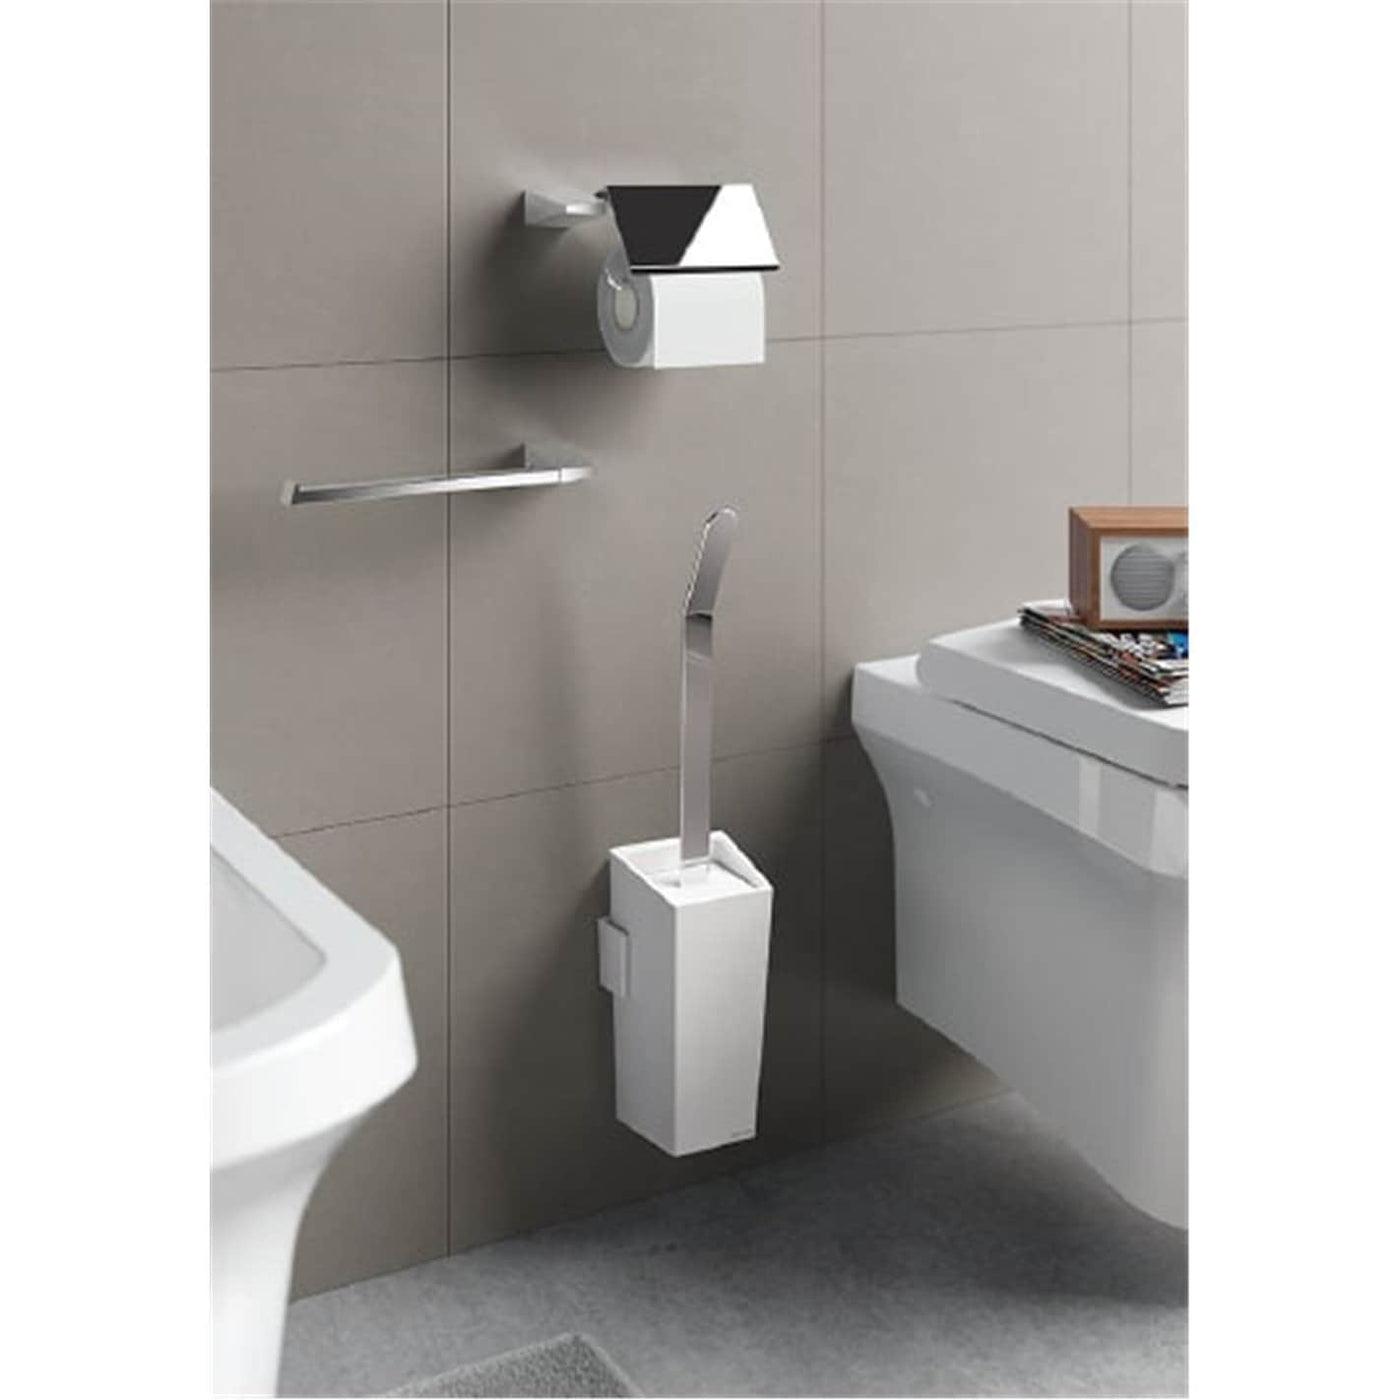 S2 Toilet Roll Holder With Cover,Accessories,Sonia,Haji Gallery.